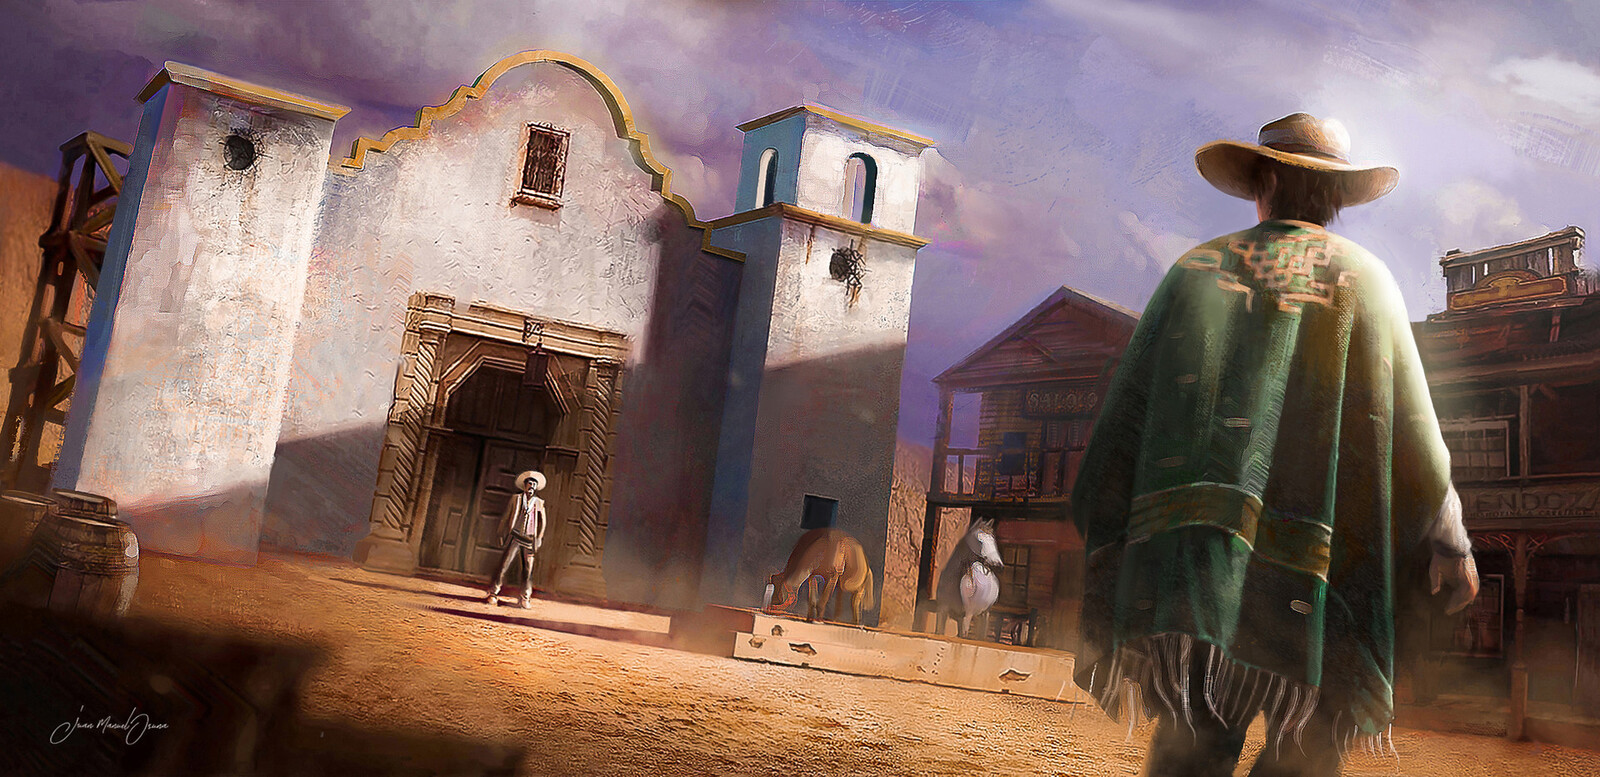 Duel in Mexico - Keyframe art 